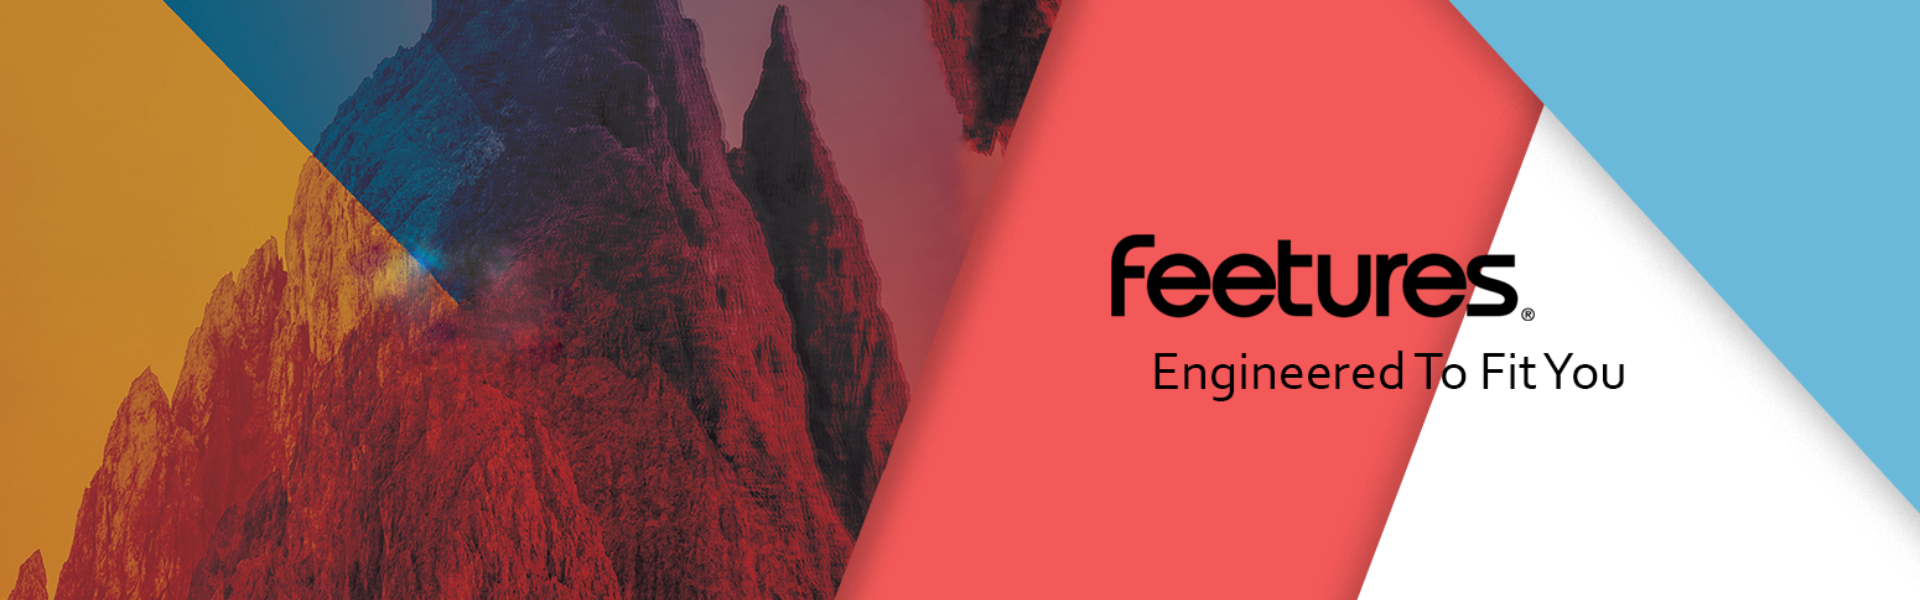 feetures banner